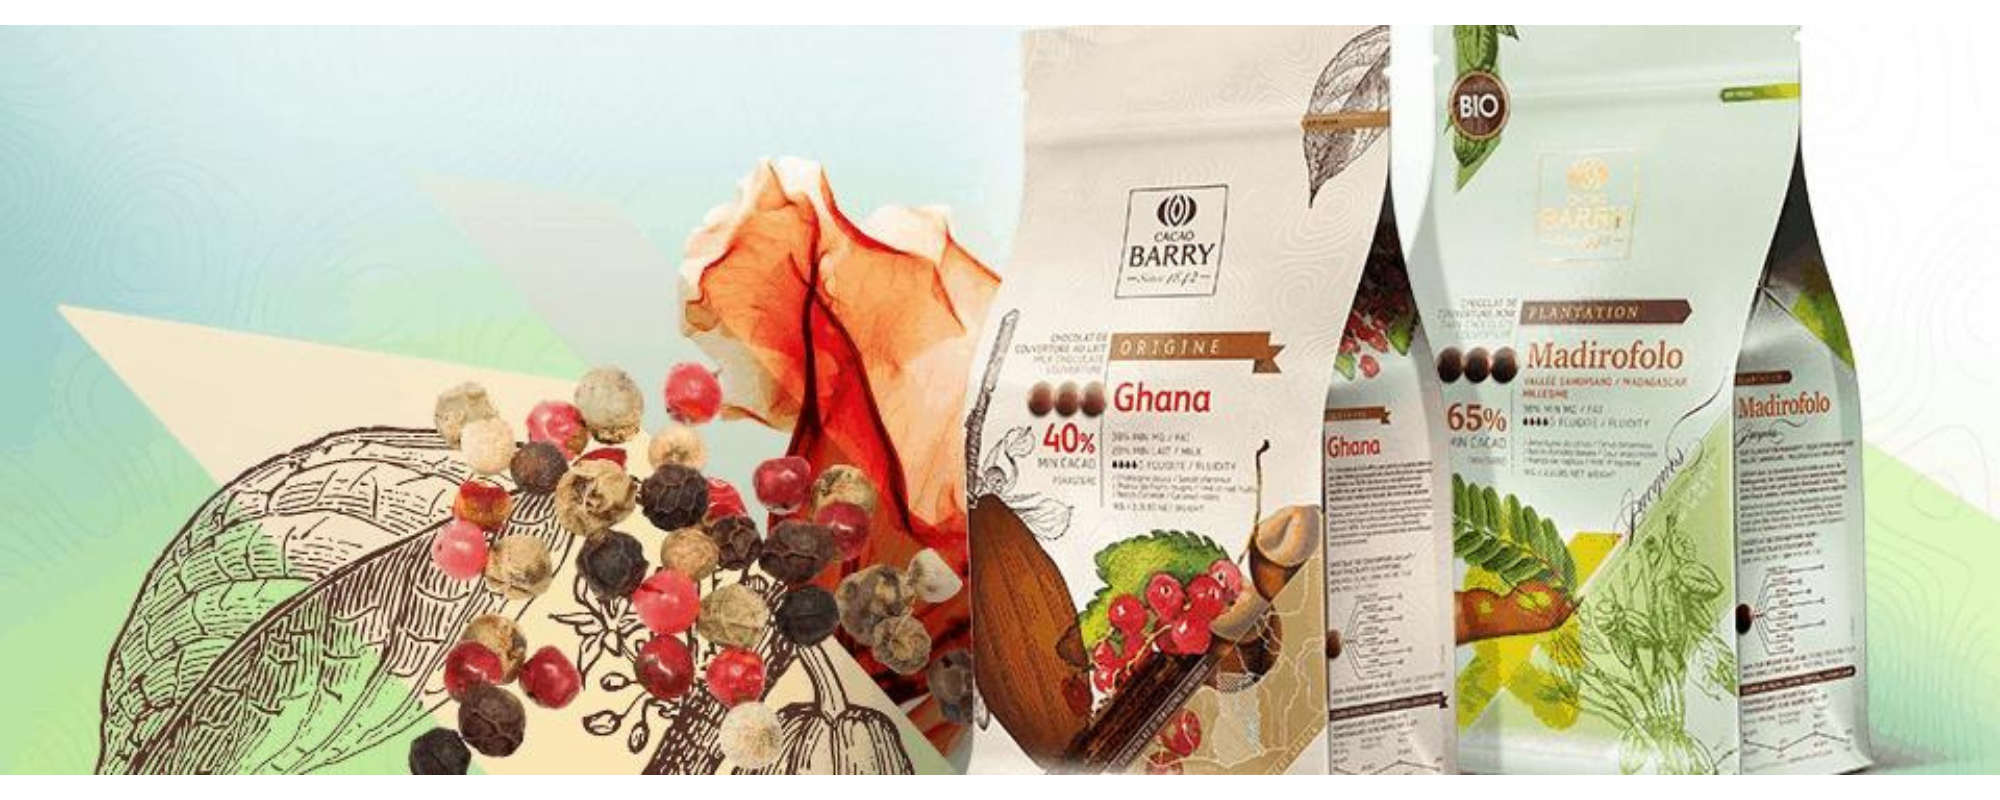 GHANA CACAO BARRY (4).png